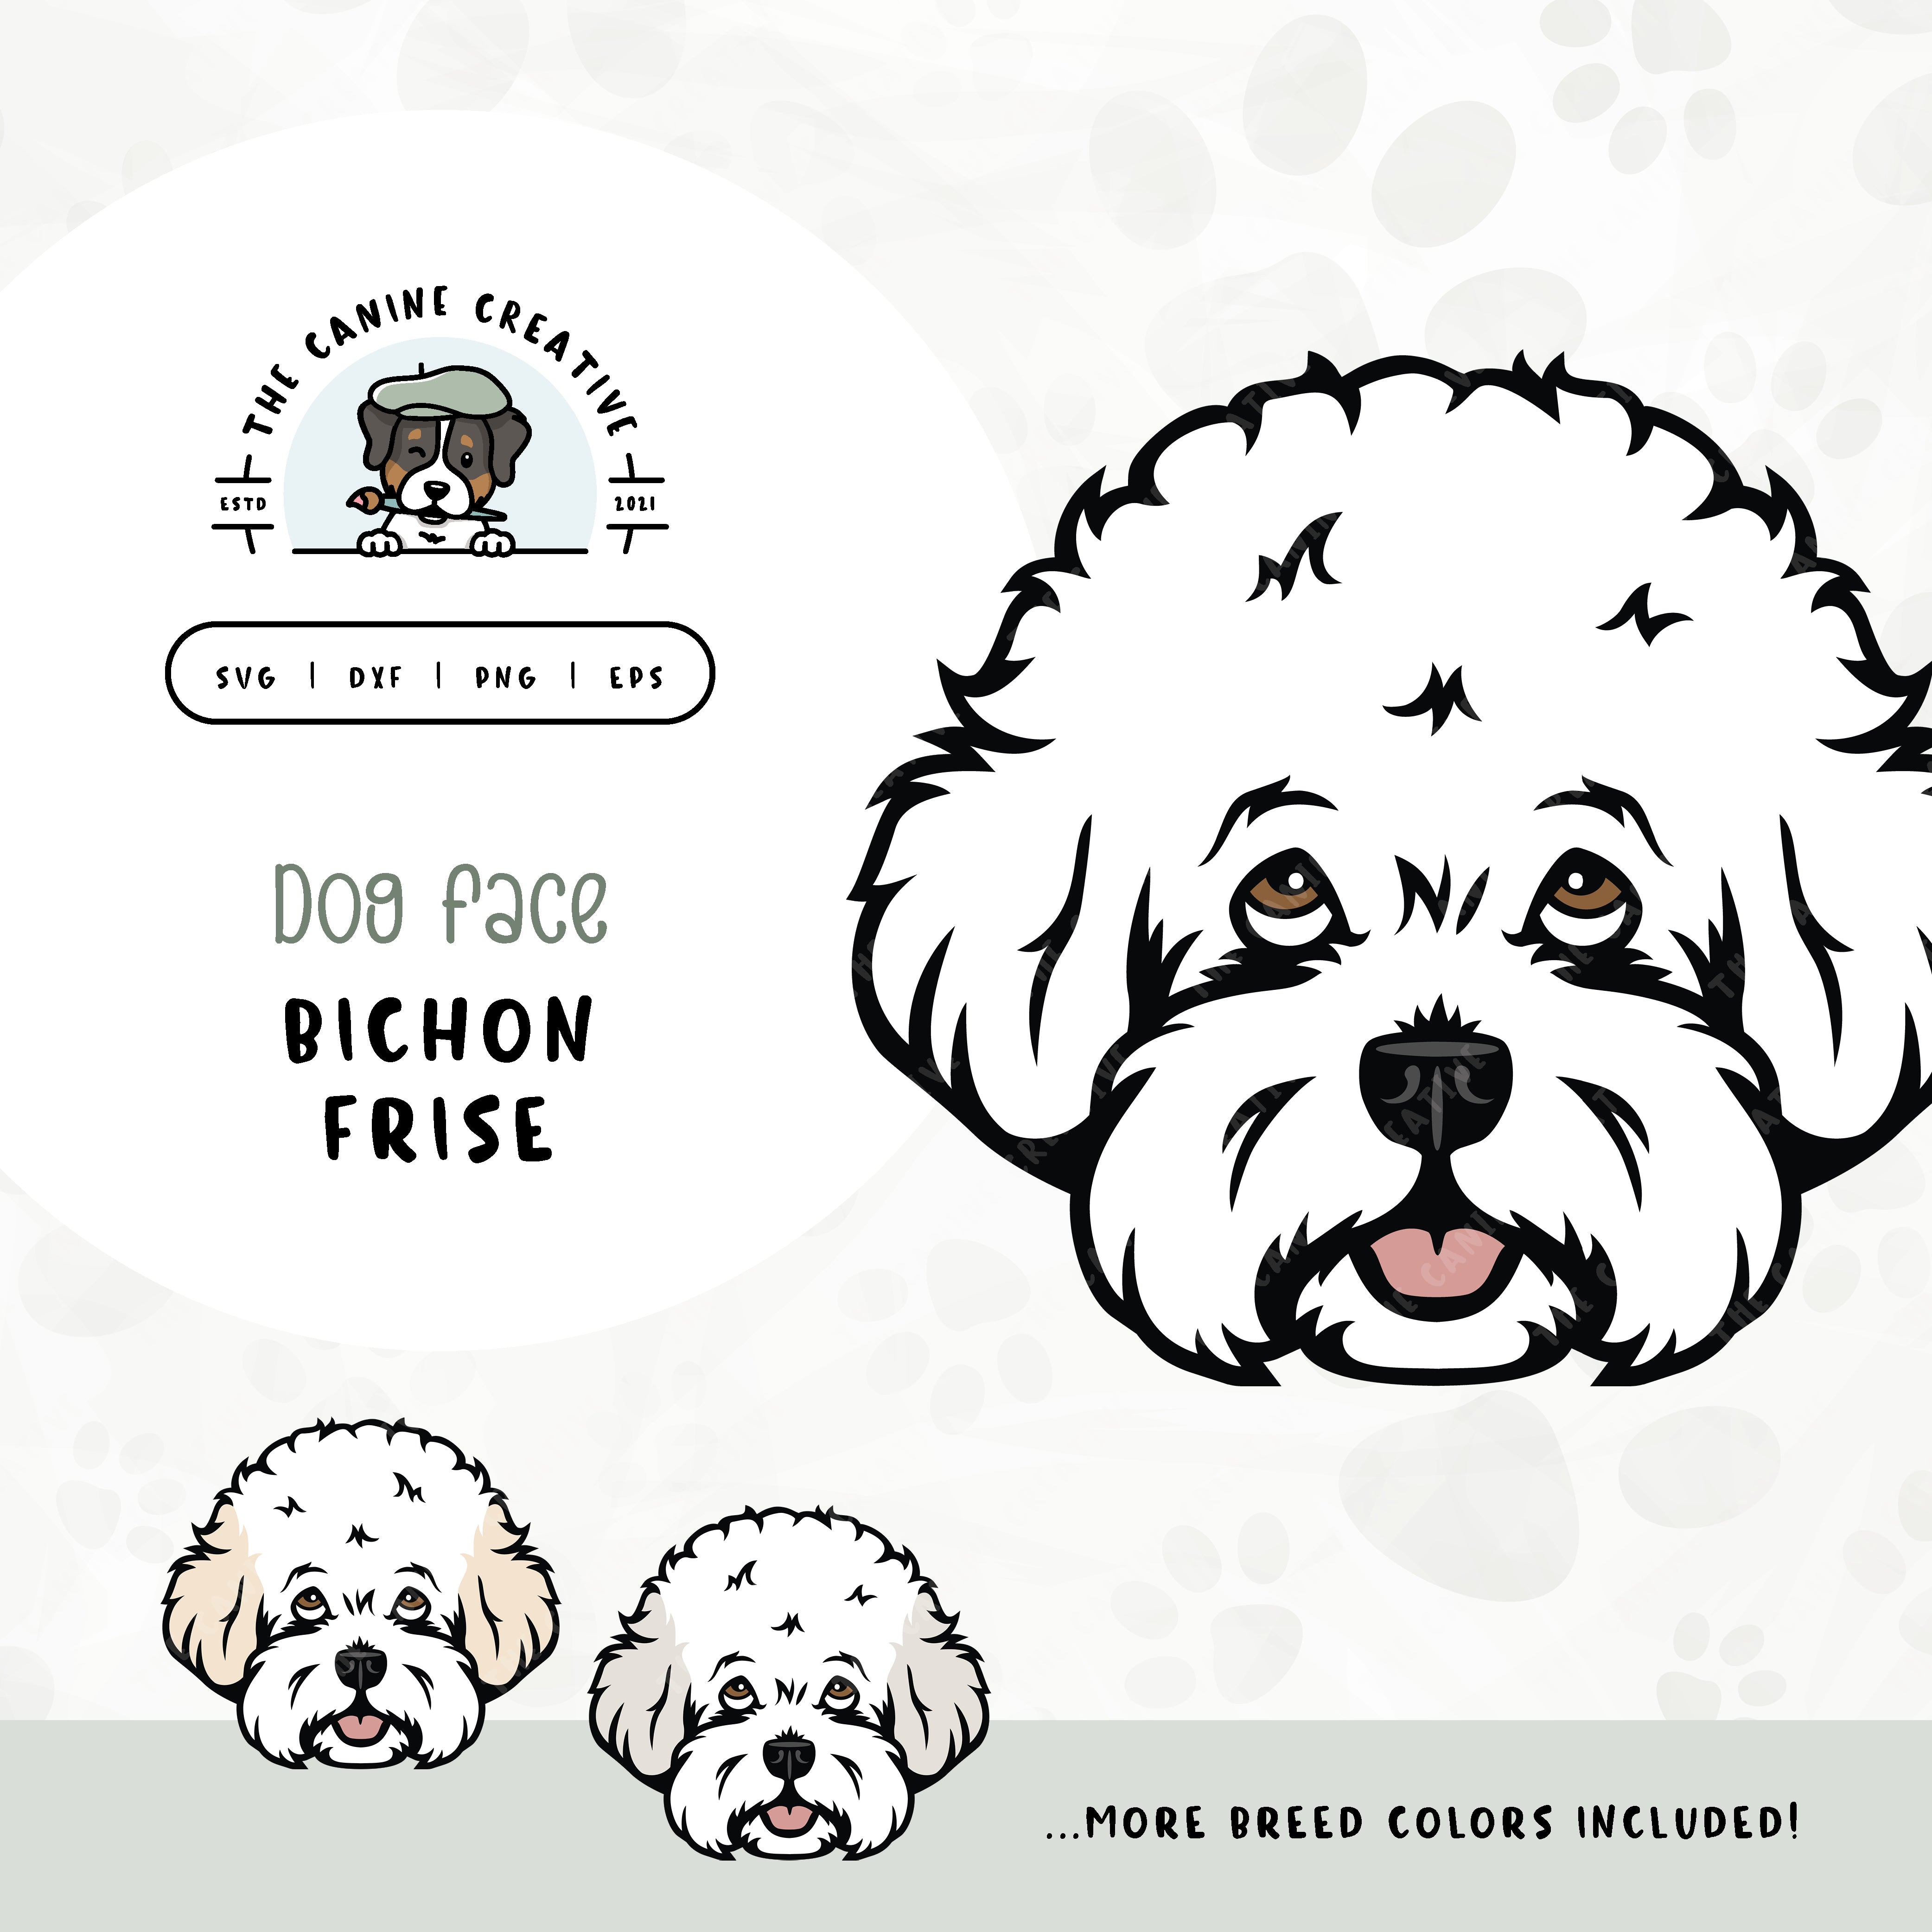 This illustrated design features a Bichon Frise face. File formats include: SVG, DXF, PNG, and EPS.